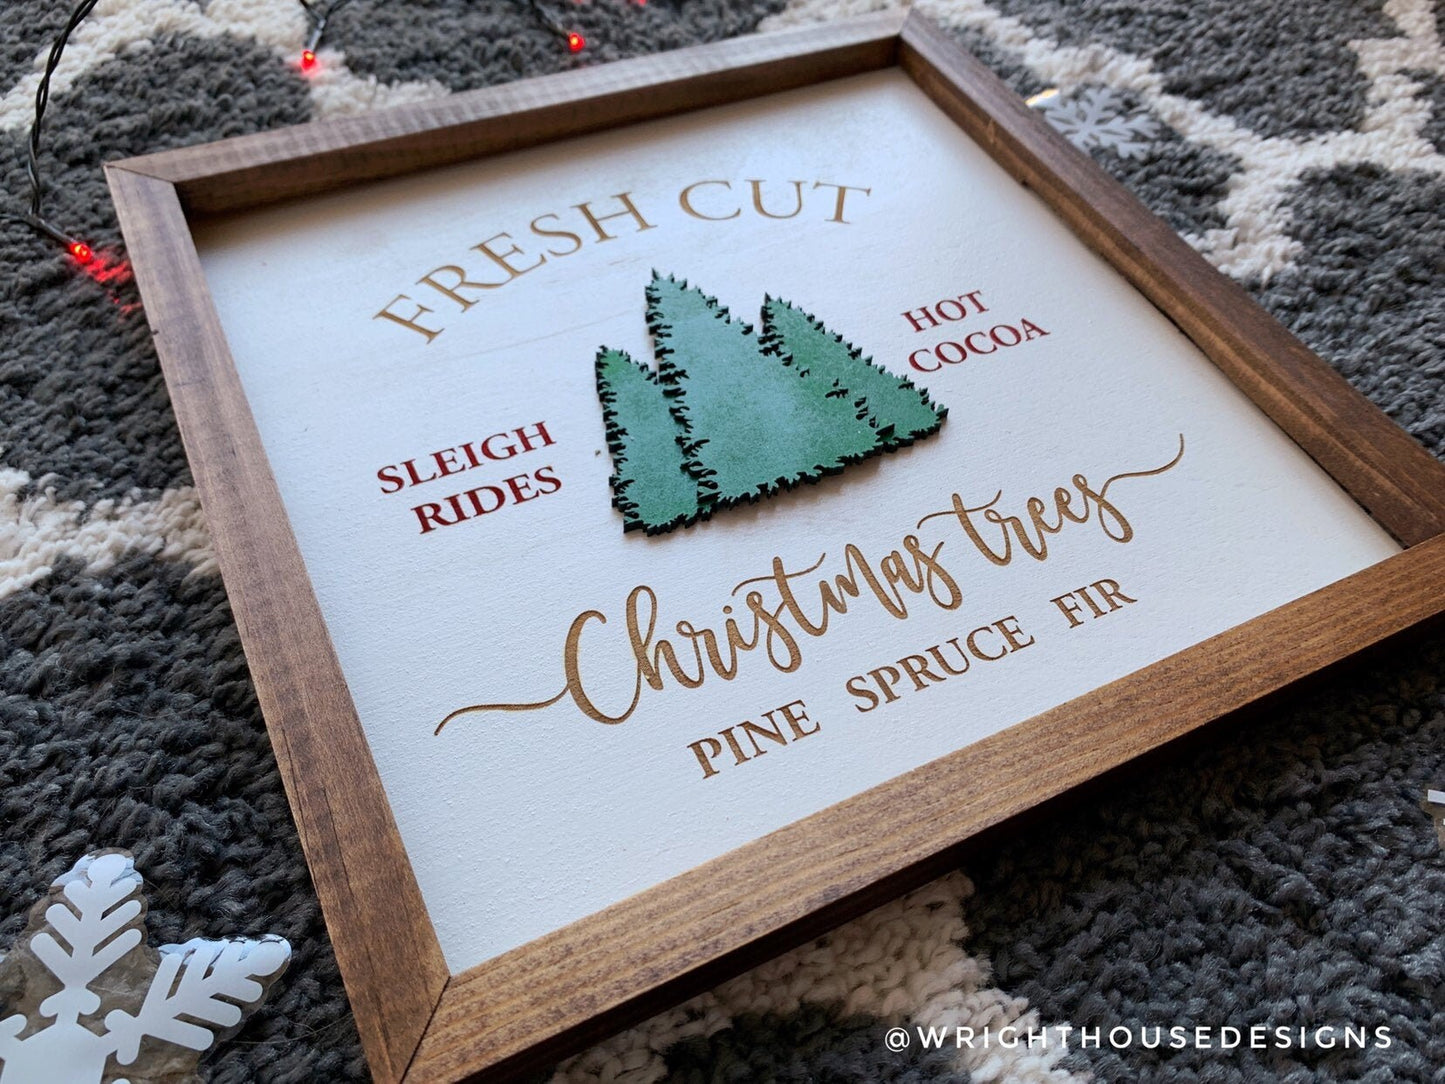 Fresh Cut Christmas Trees - Coffee Bar Sign - Seasonal Home and Kitchen Decor - Winter Cottagecore Framed Wall Art - Holiday Decorations